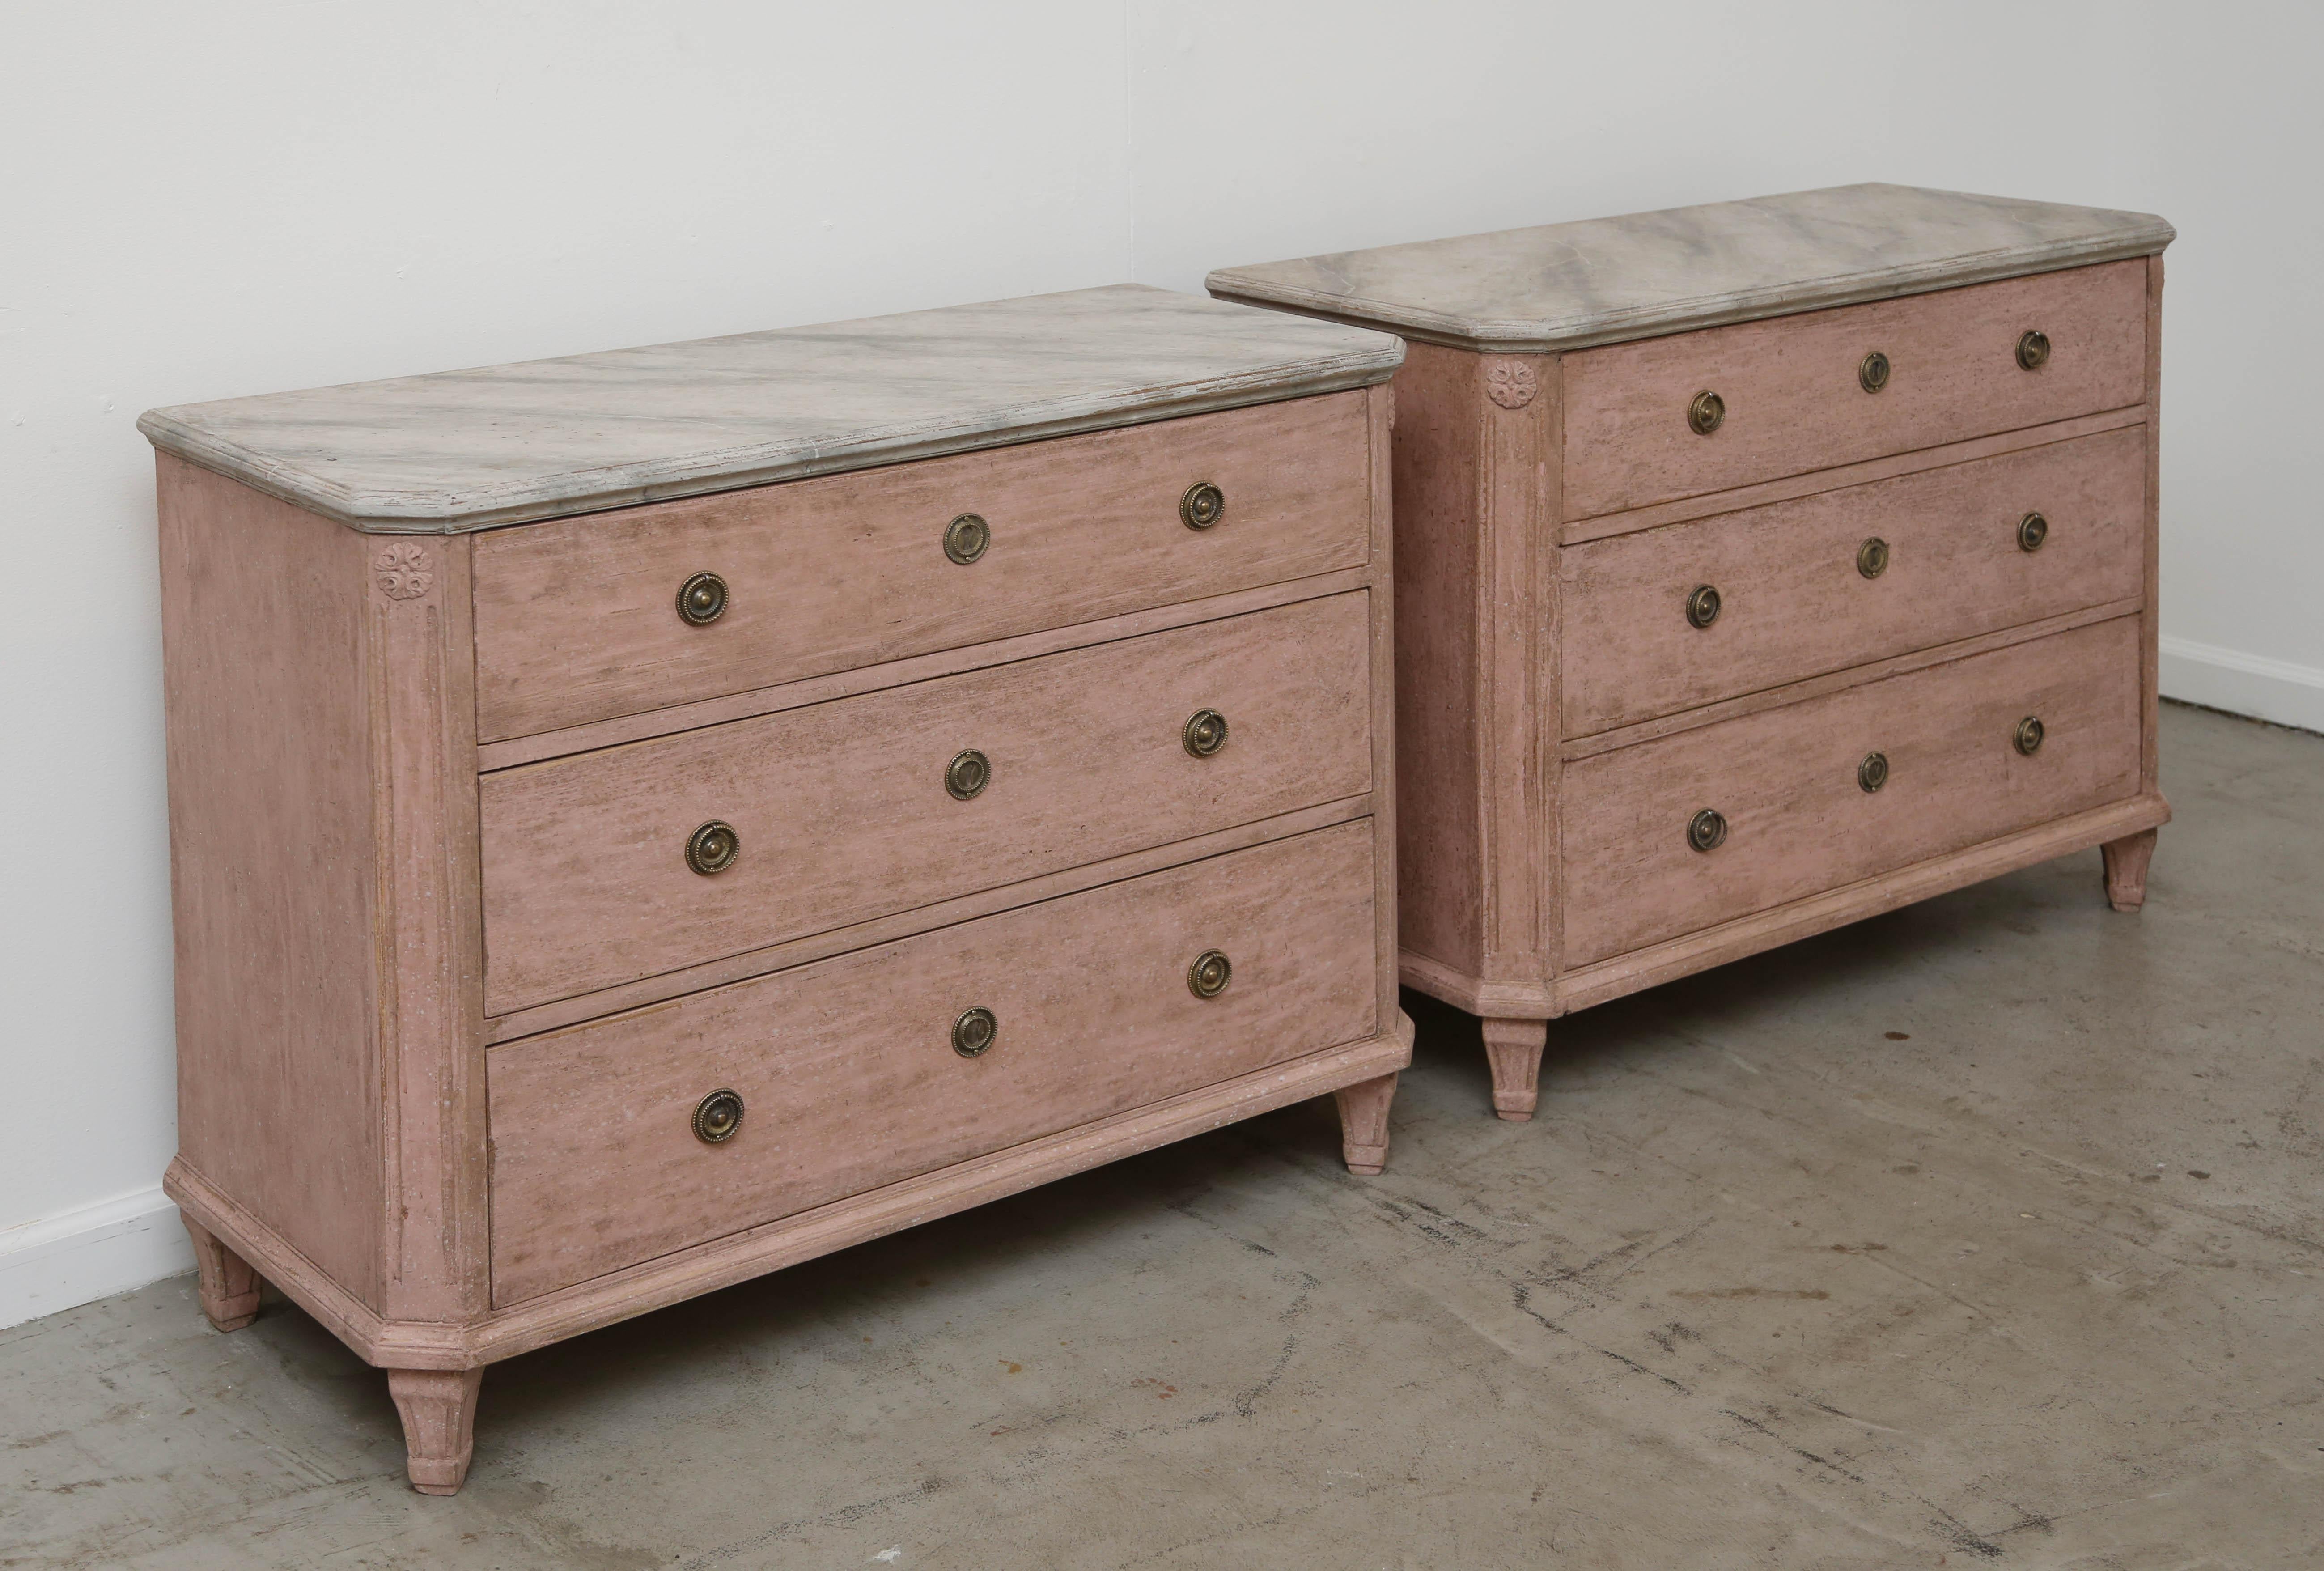 Wood Pair of Antique Swedish Gustavian Style Rose Painted Chests, Late 19th Century